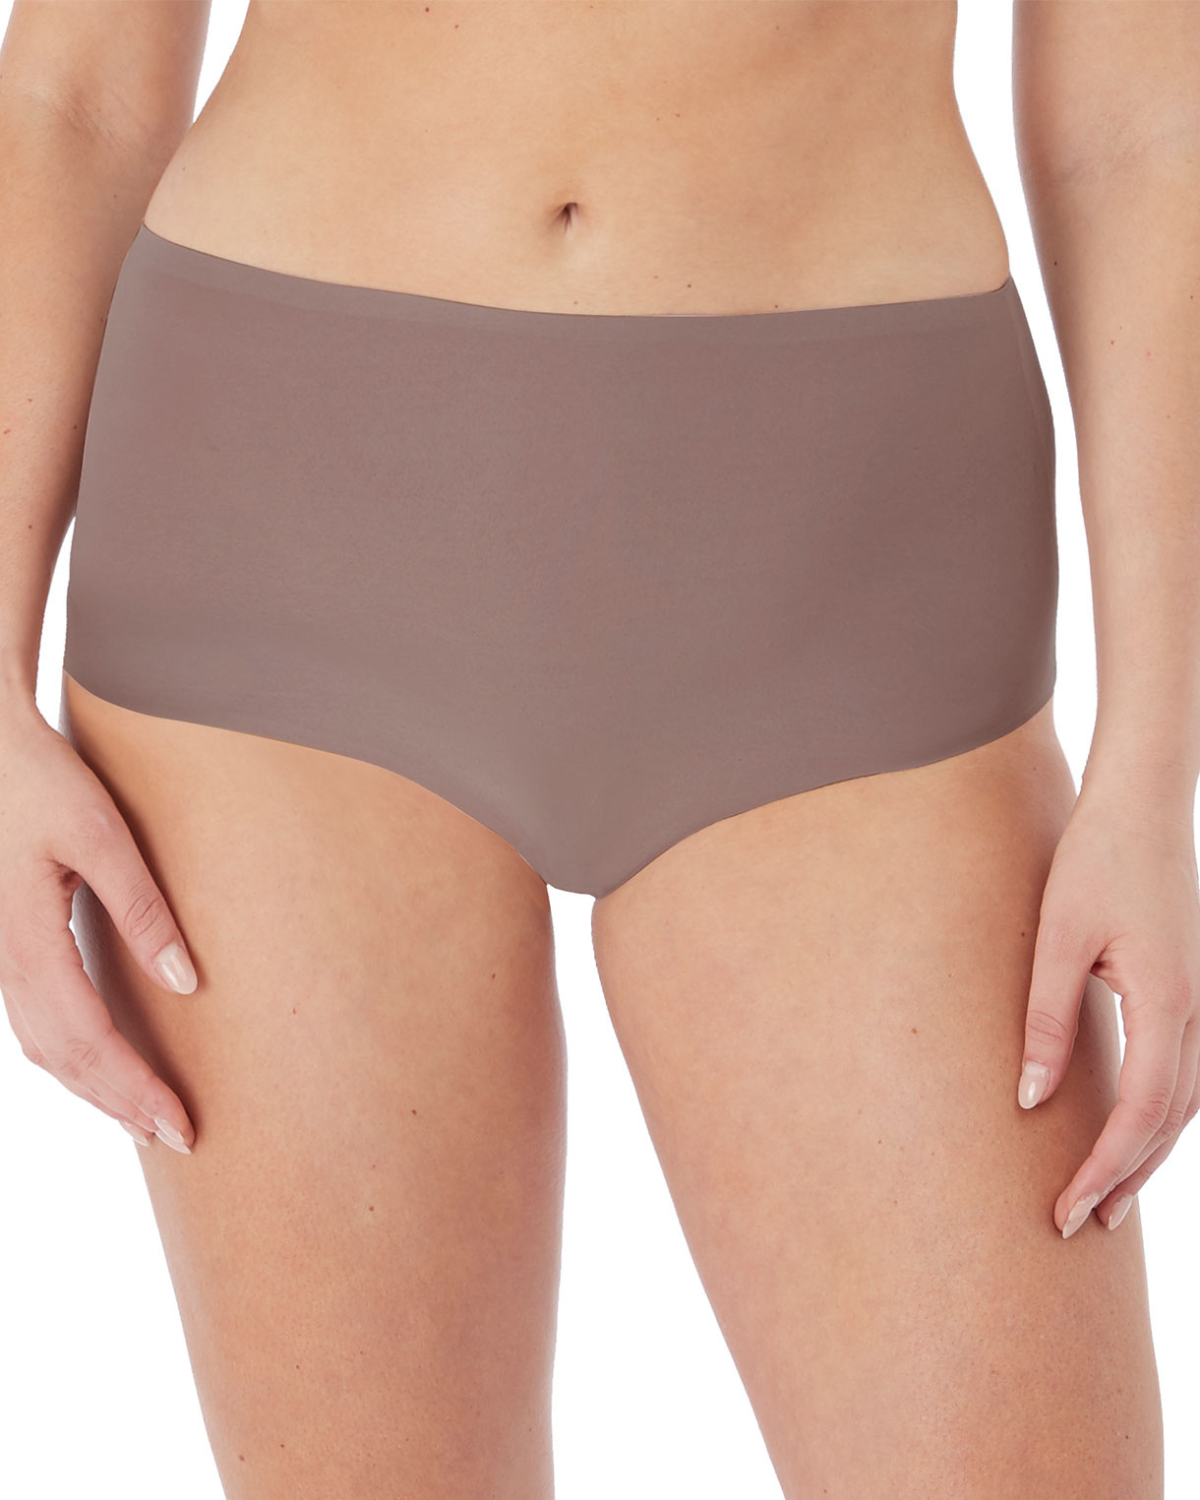 Model wearing a seamless stretch full brief in taupe